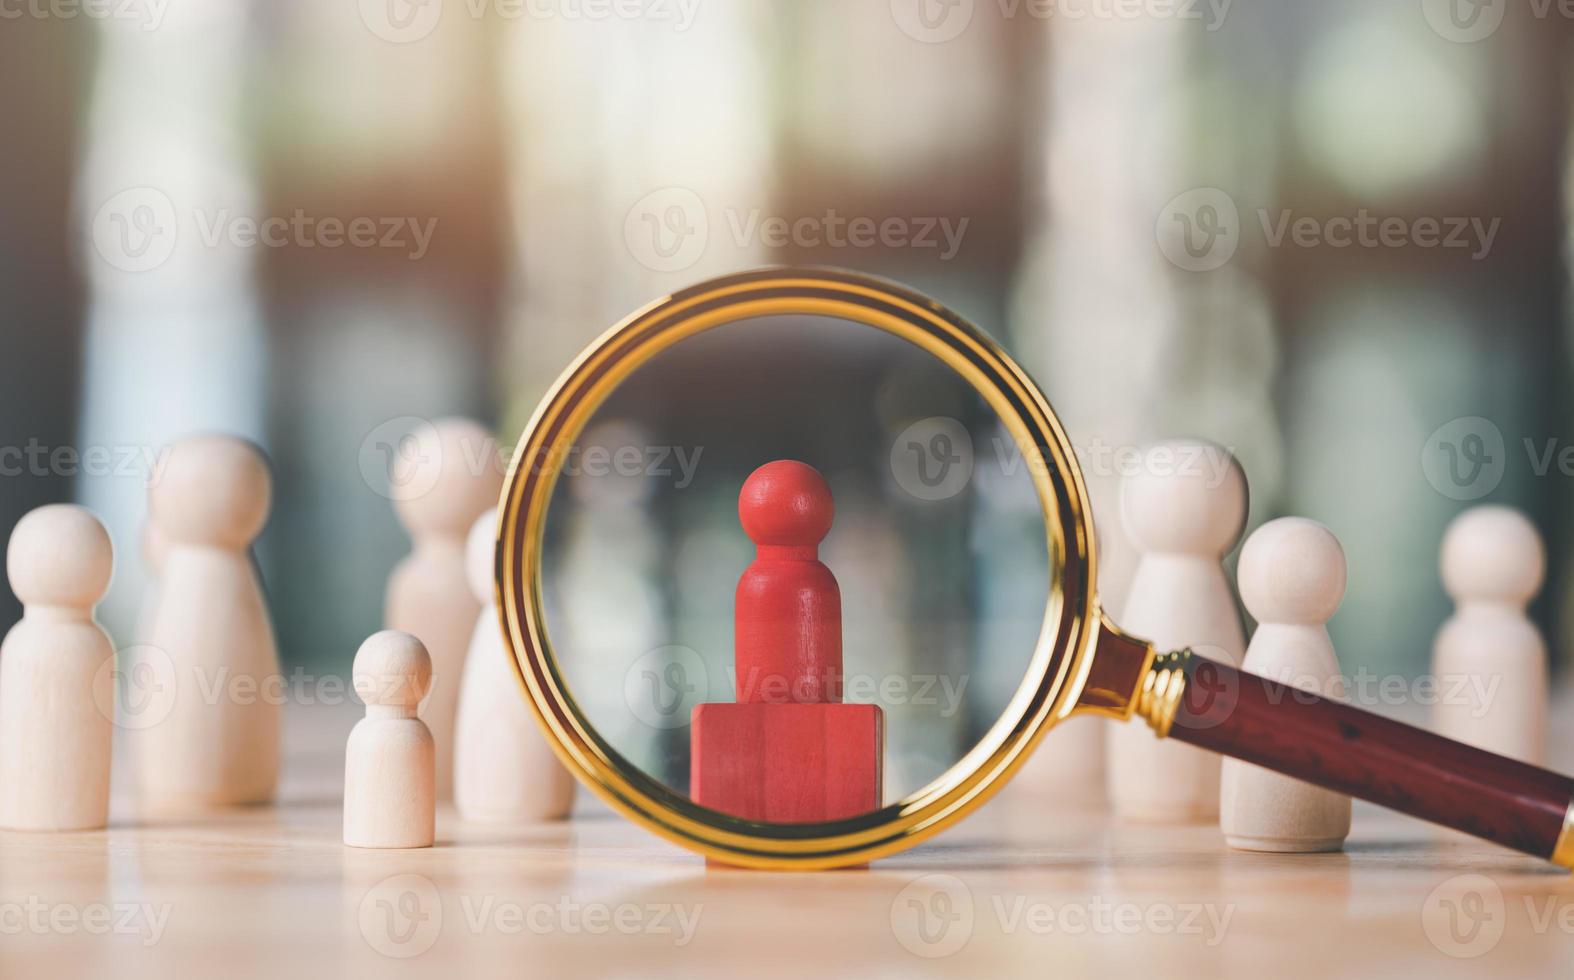 magnifying glass and a wooden doll are placed on table,HRM or Human Resource Management,leadership in recruitment,Business development by choosing professional leaders employee competency teamwork photo